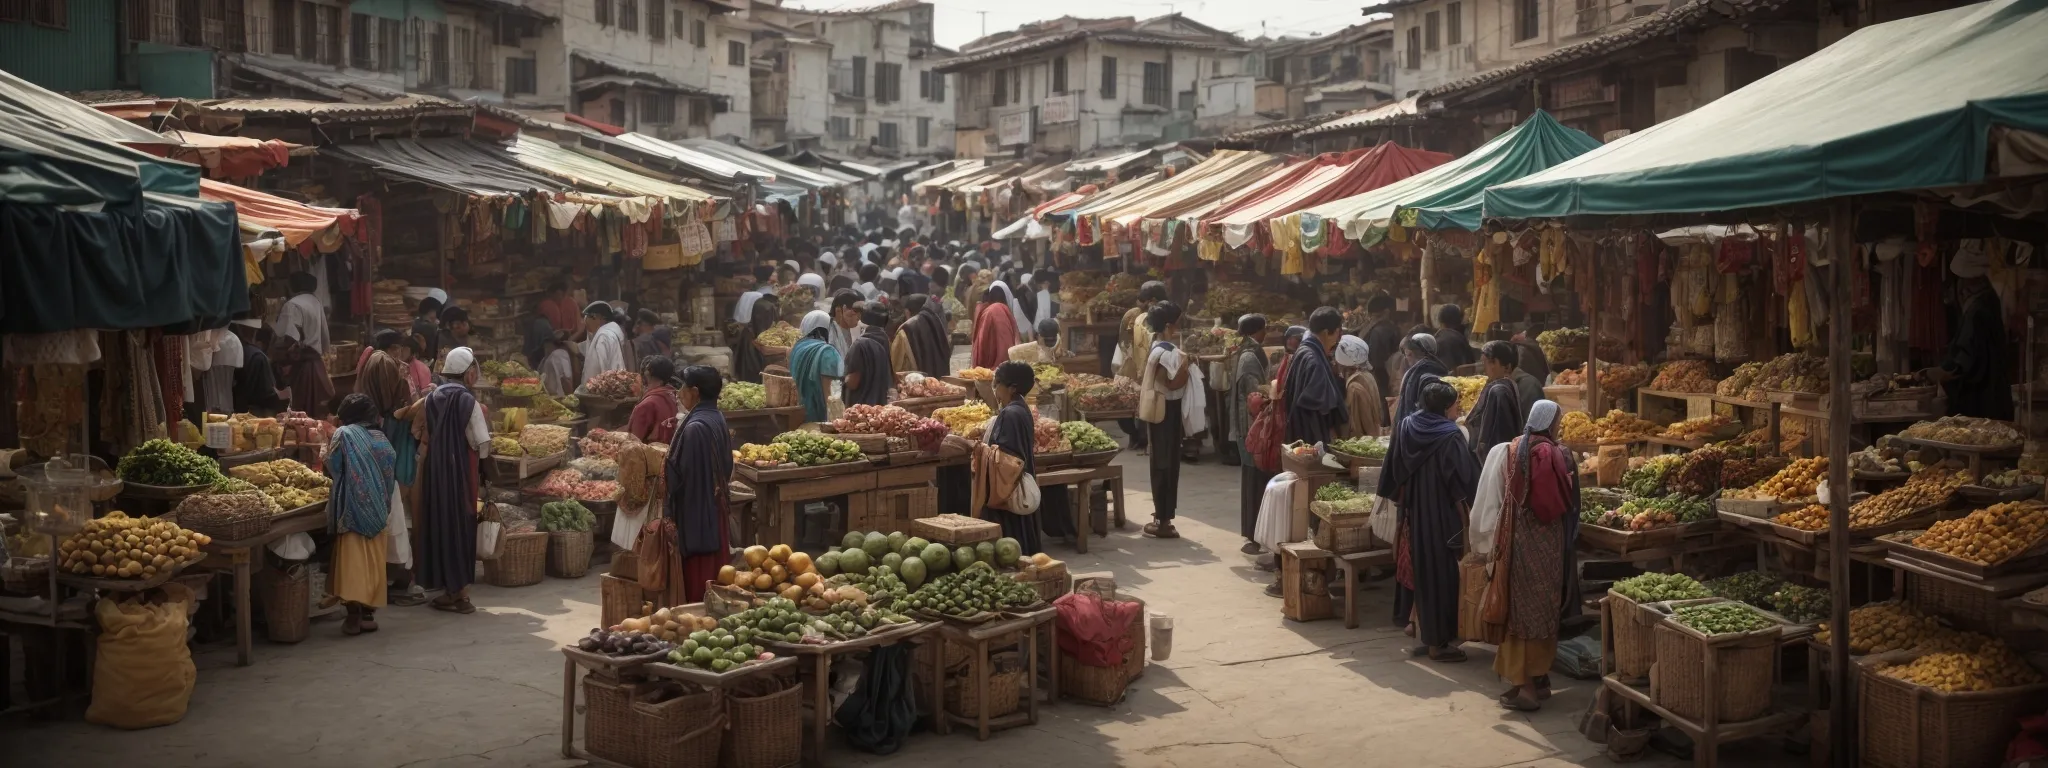 a bustling local market scene with vendors using digital displays showcasing various products.